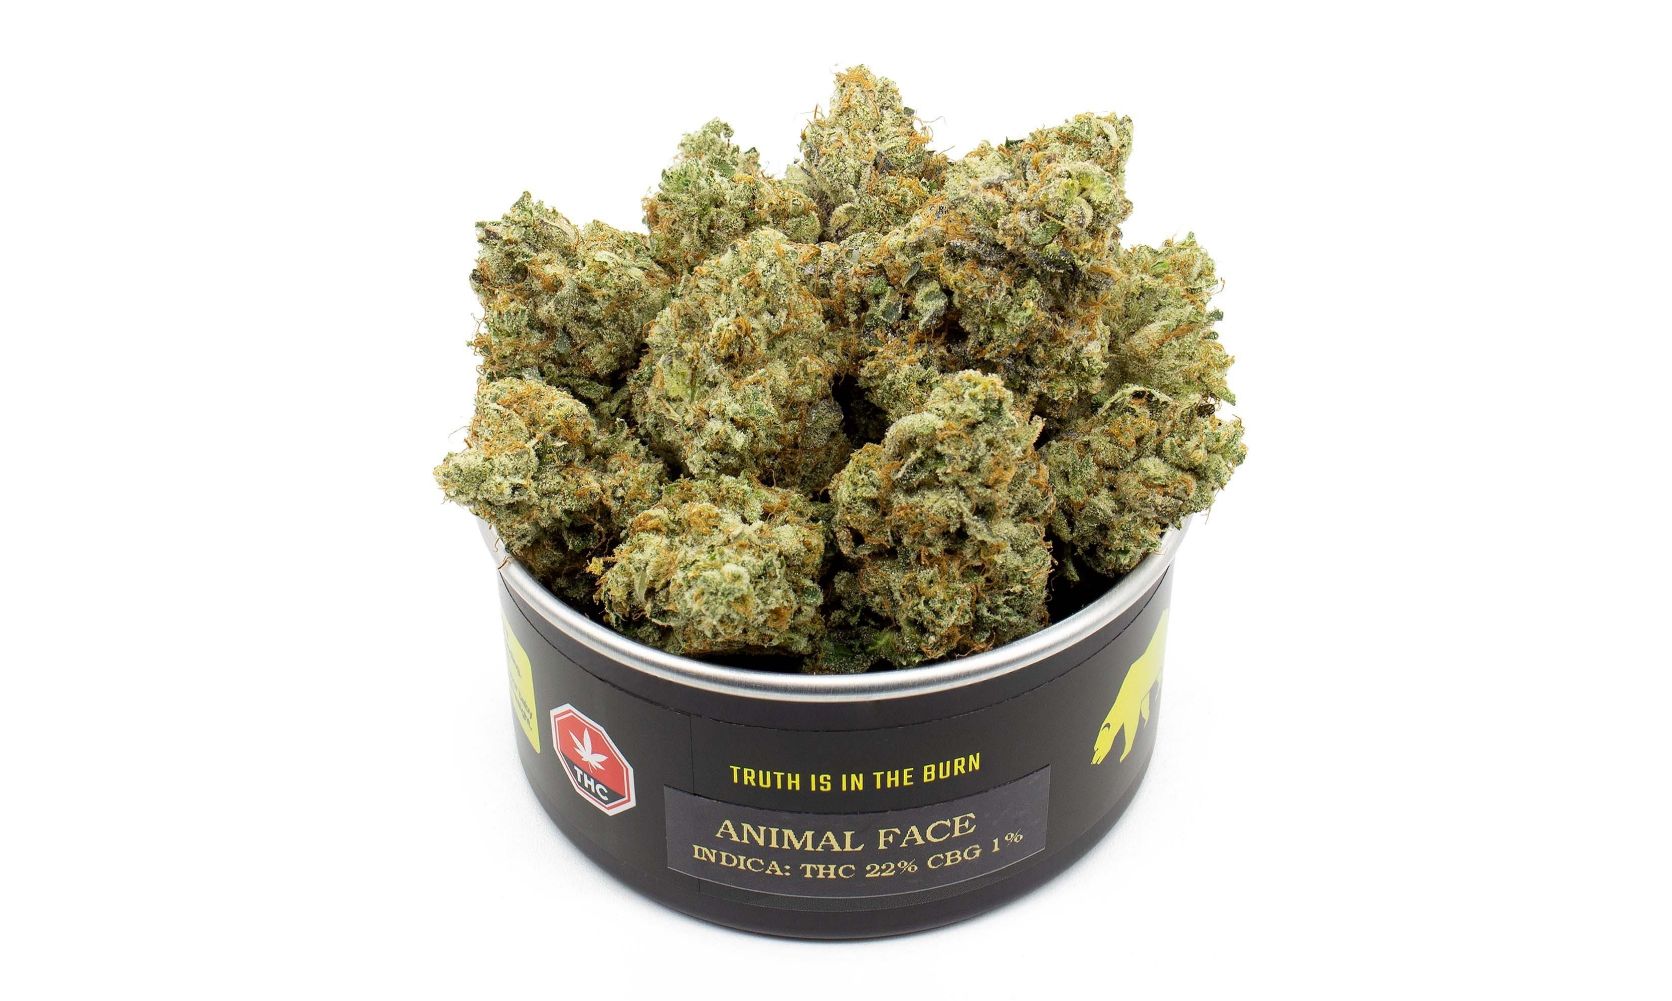 Animal Face strain is one of those hybrid strains every smoker loves. Potent & aromatic, this sativa hybrid is the perfect addition to an afternoon.